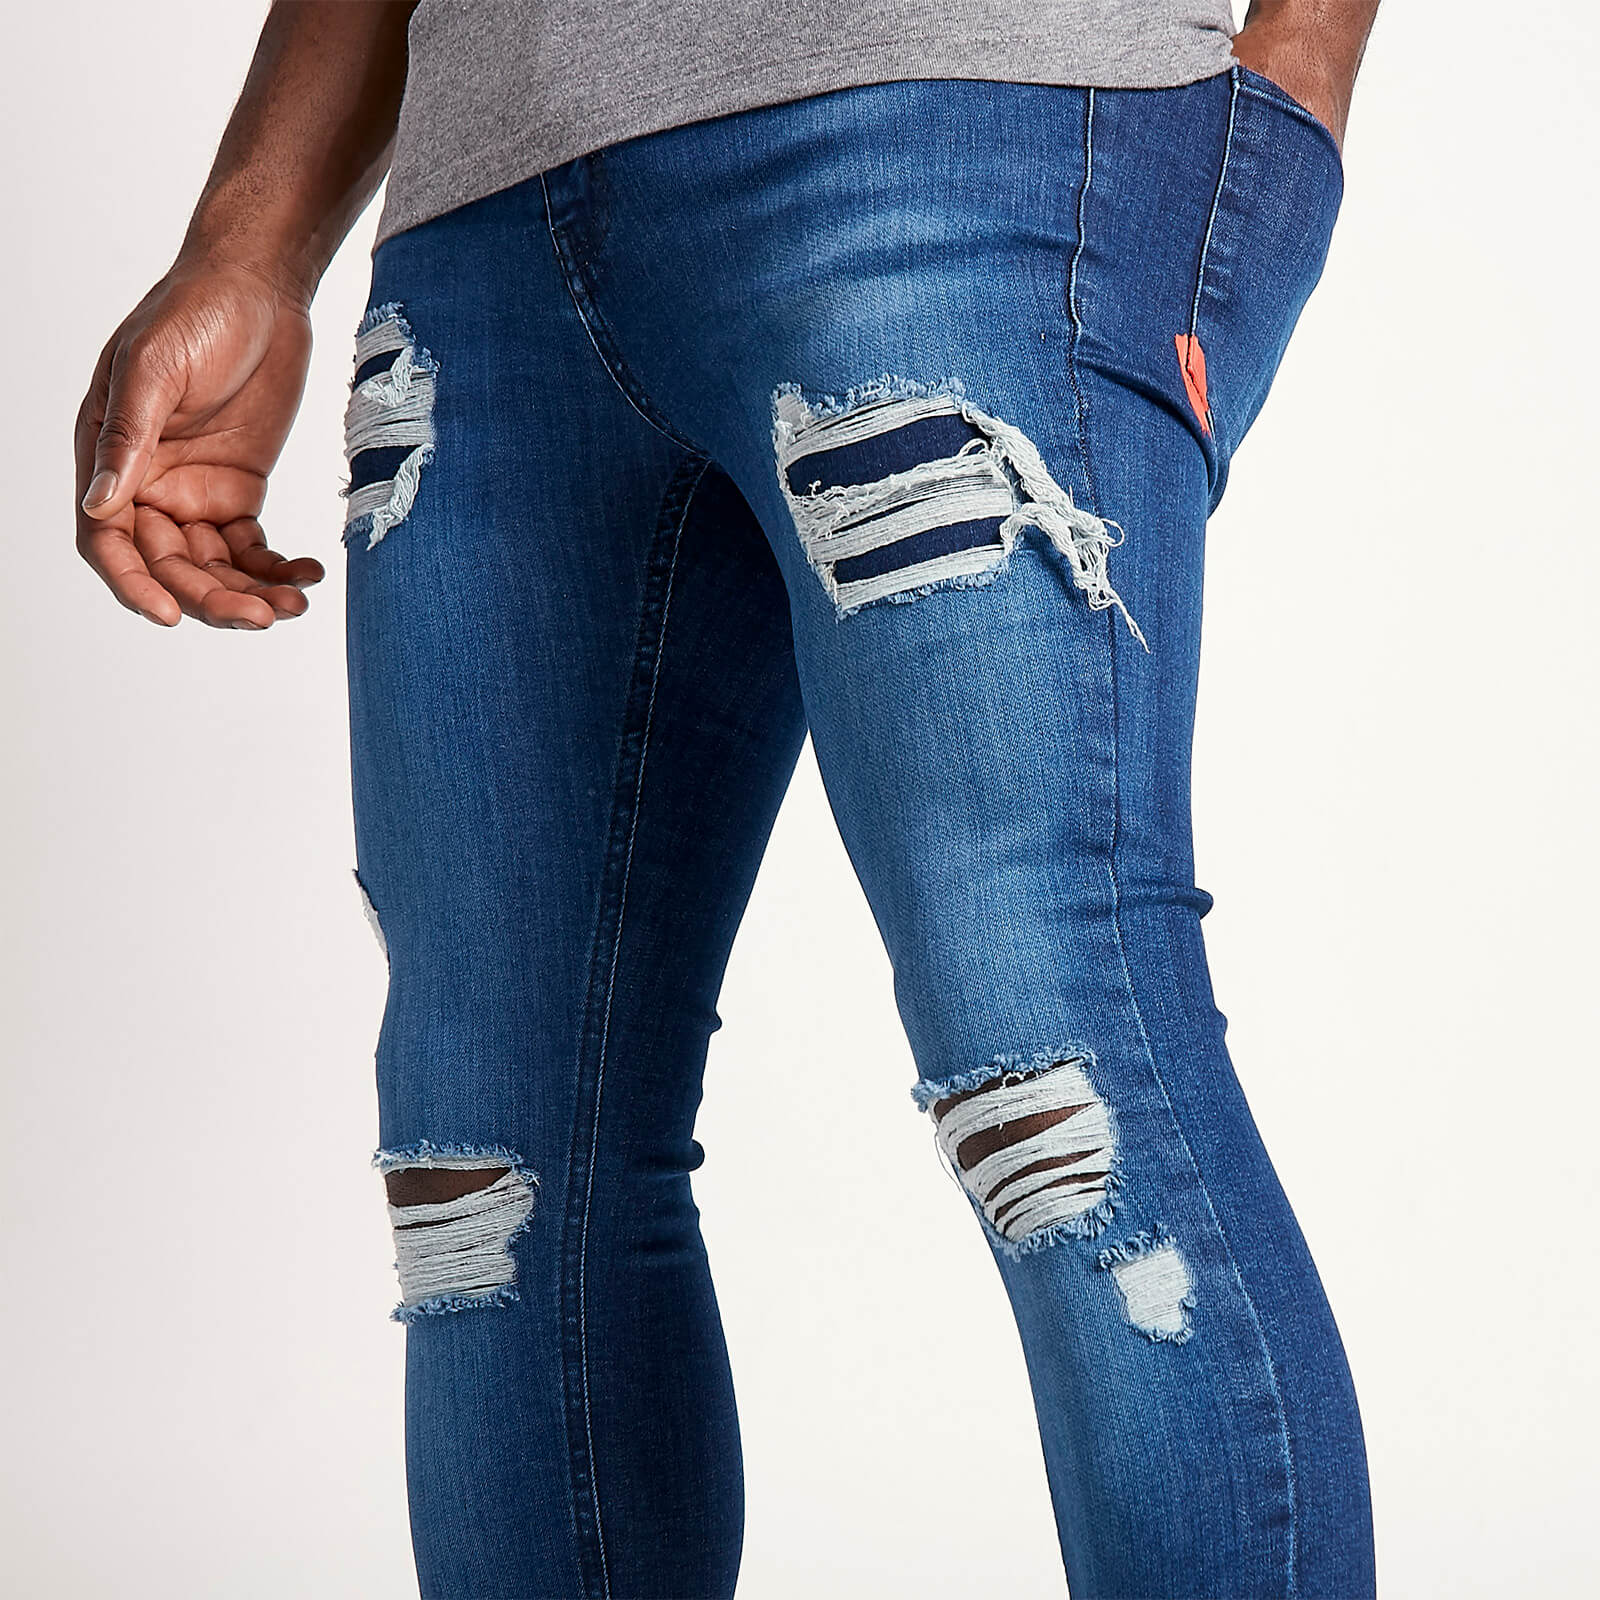 sustainable distressed jeans skinny fit – indigo wash - w32/l34